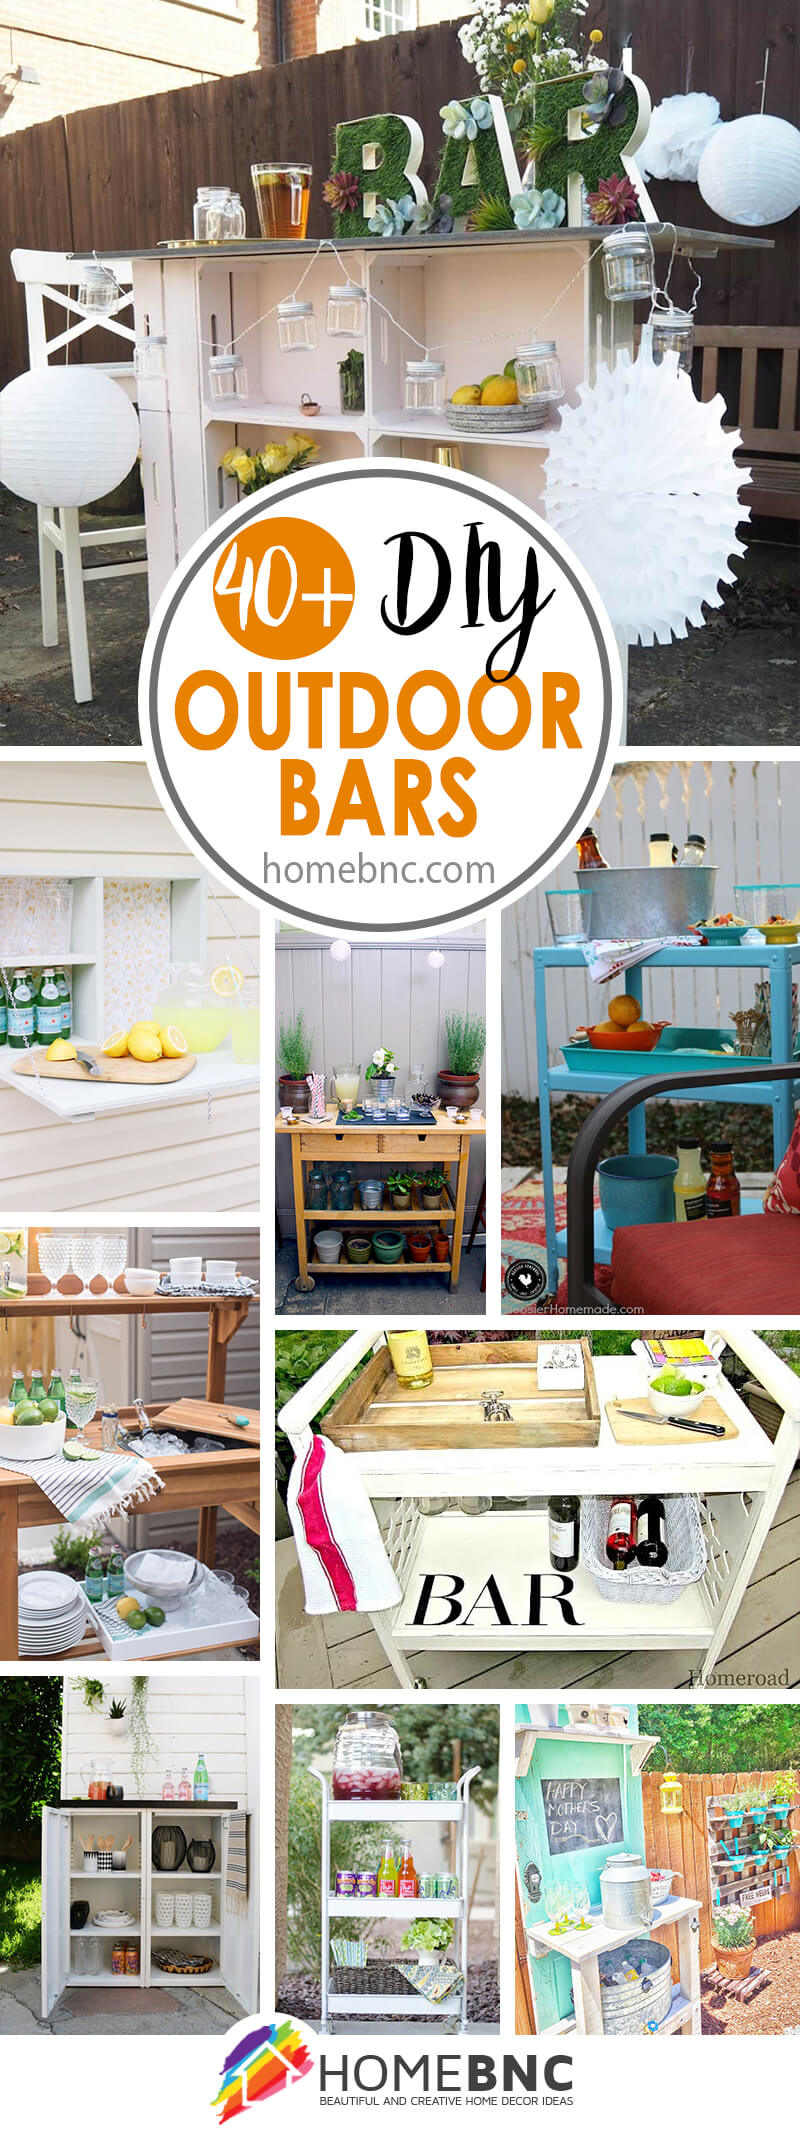 Best Diy Outdoor Bar Ideas And Designs, Outdoor Bar Set Up For Party